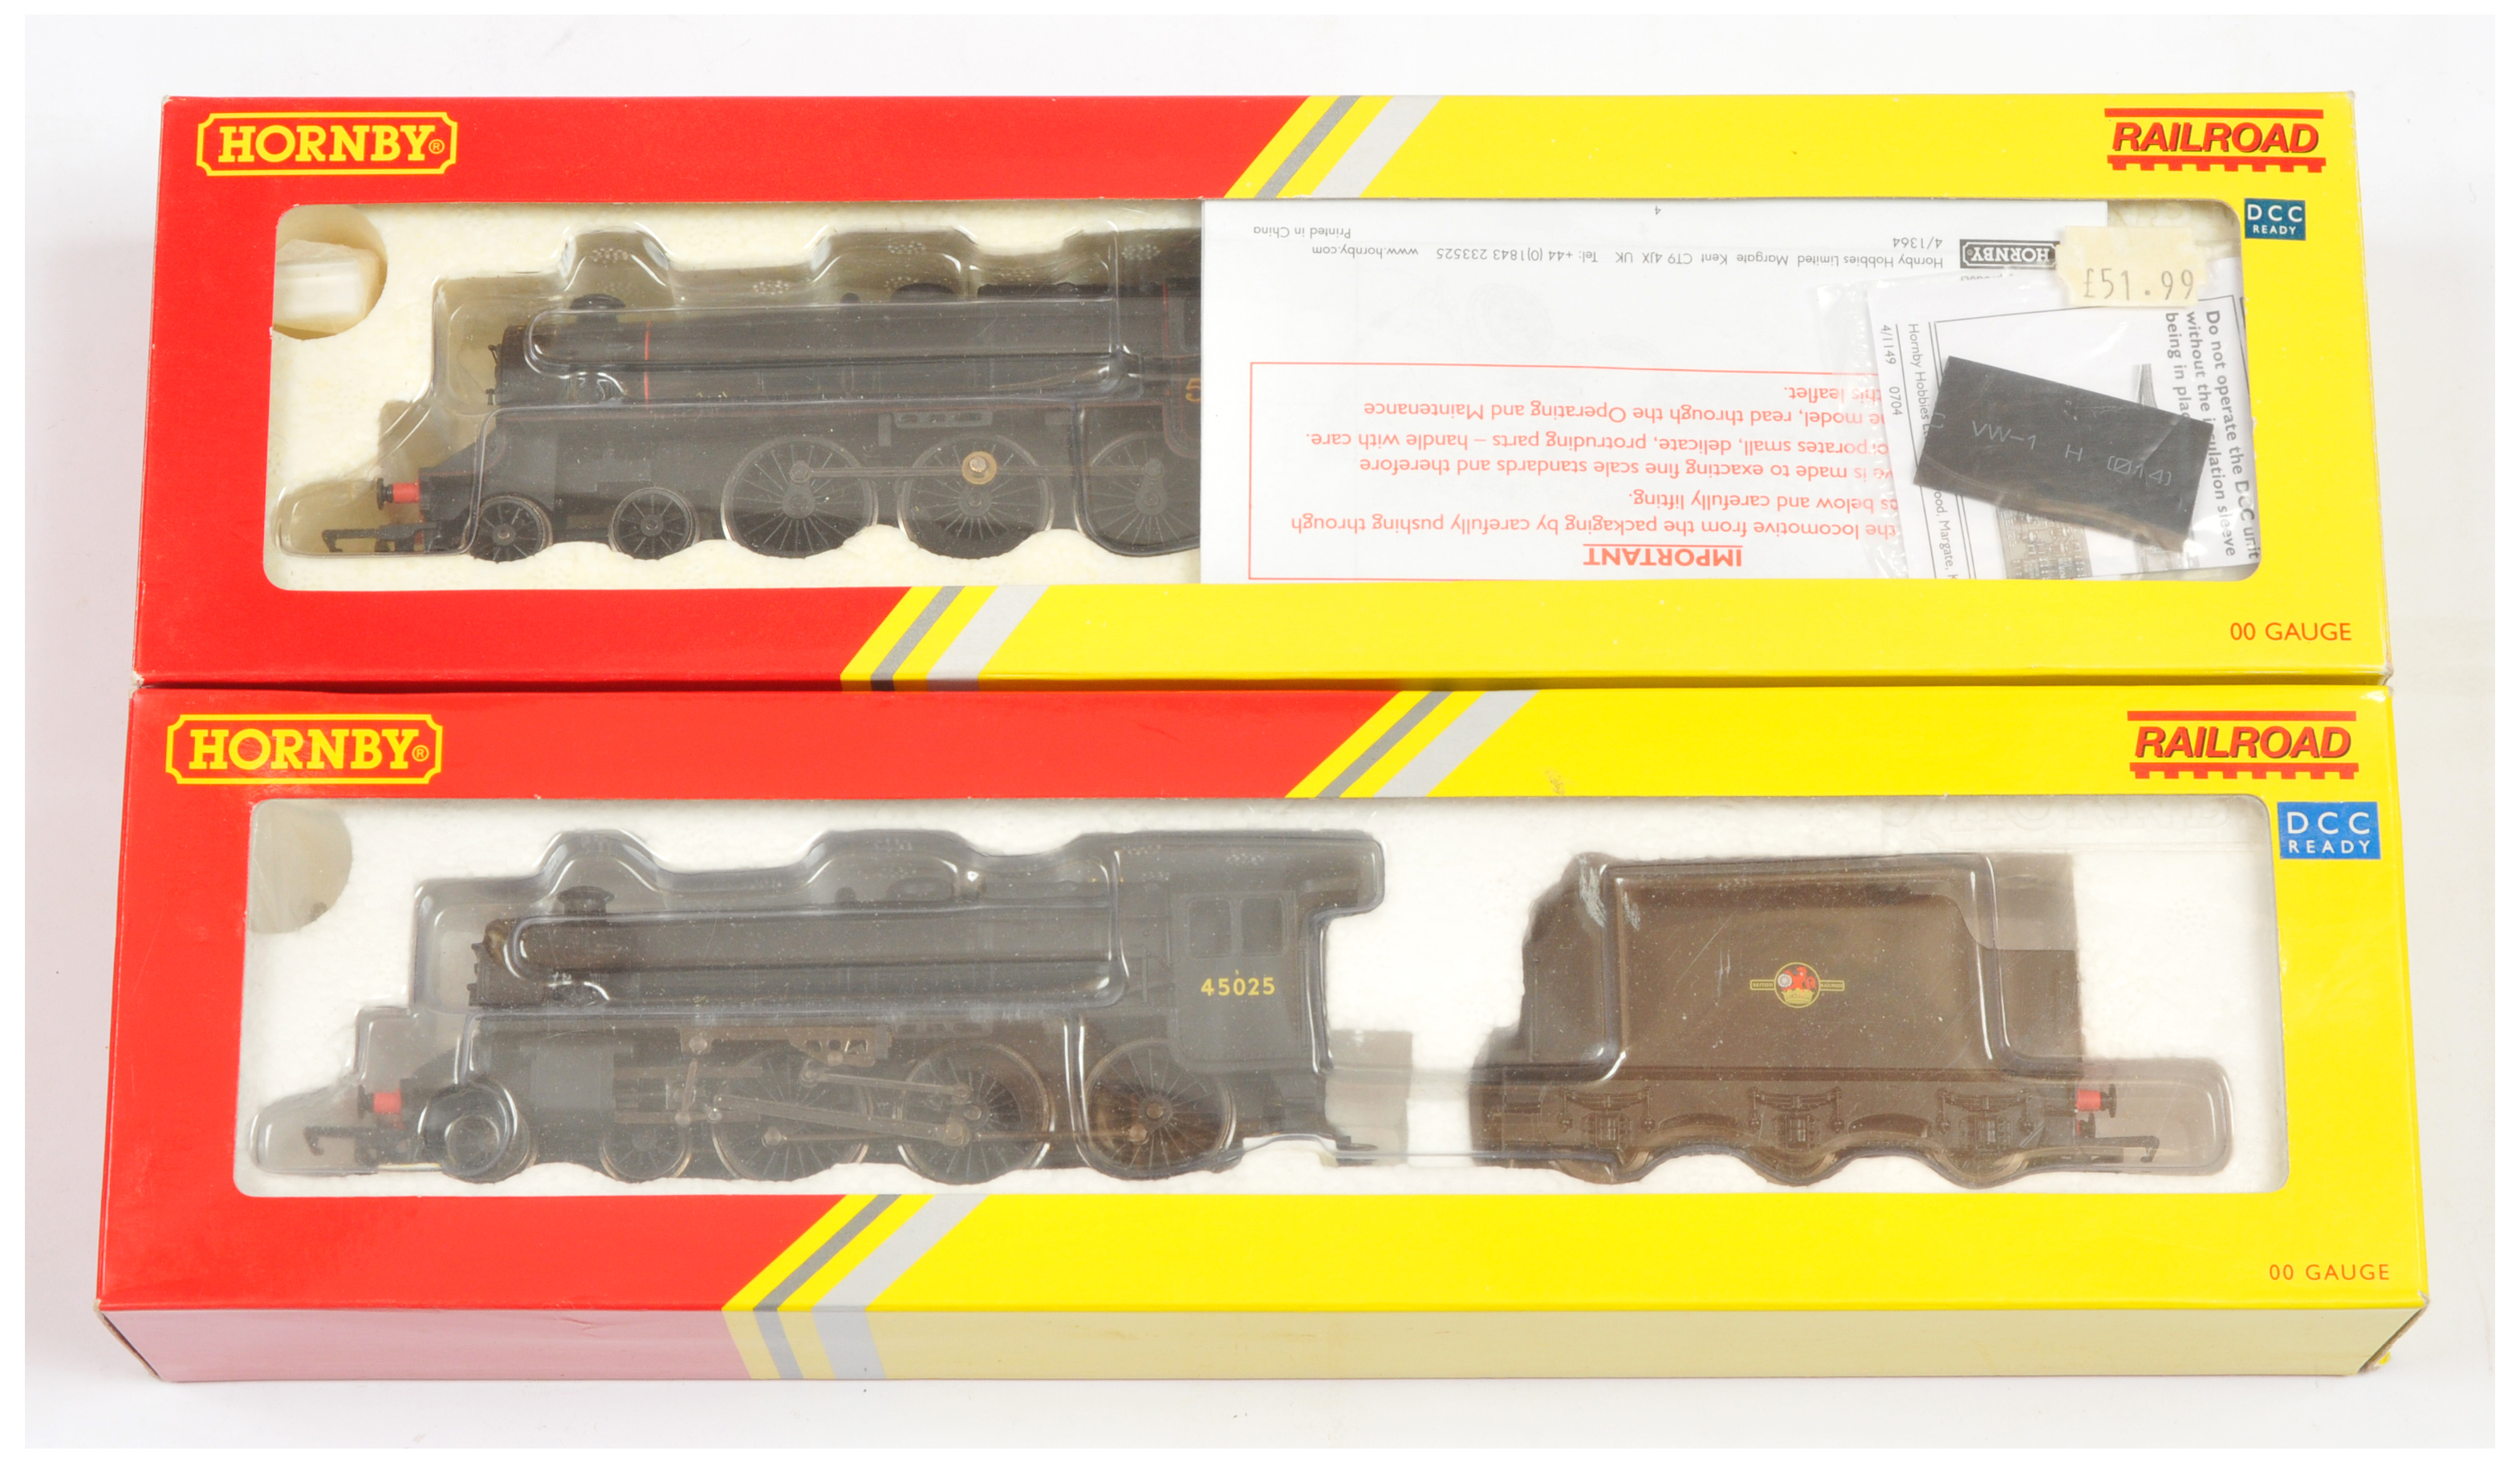 Hornby (China) Railroad a pair of Steam Locomotives comprising of 